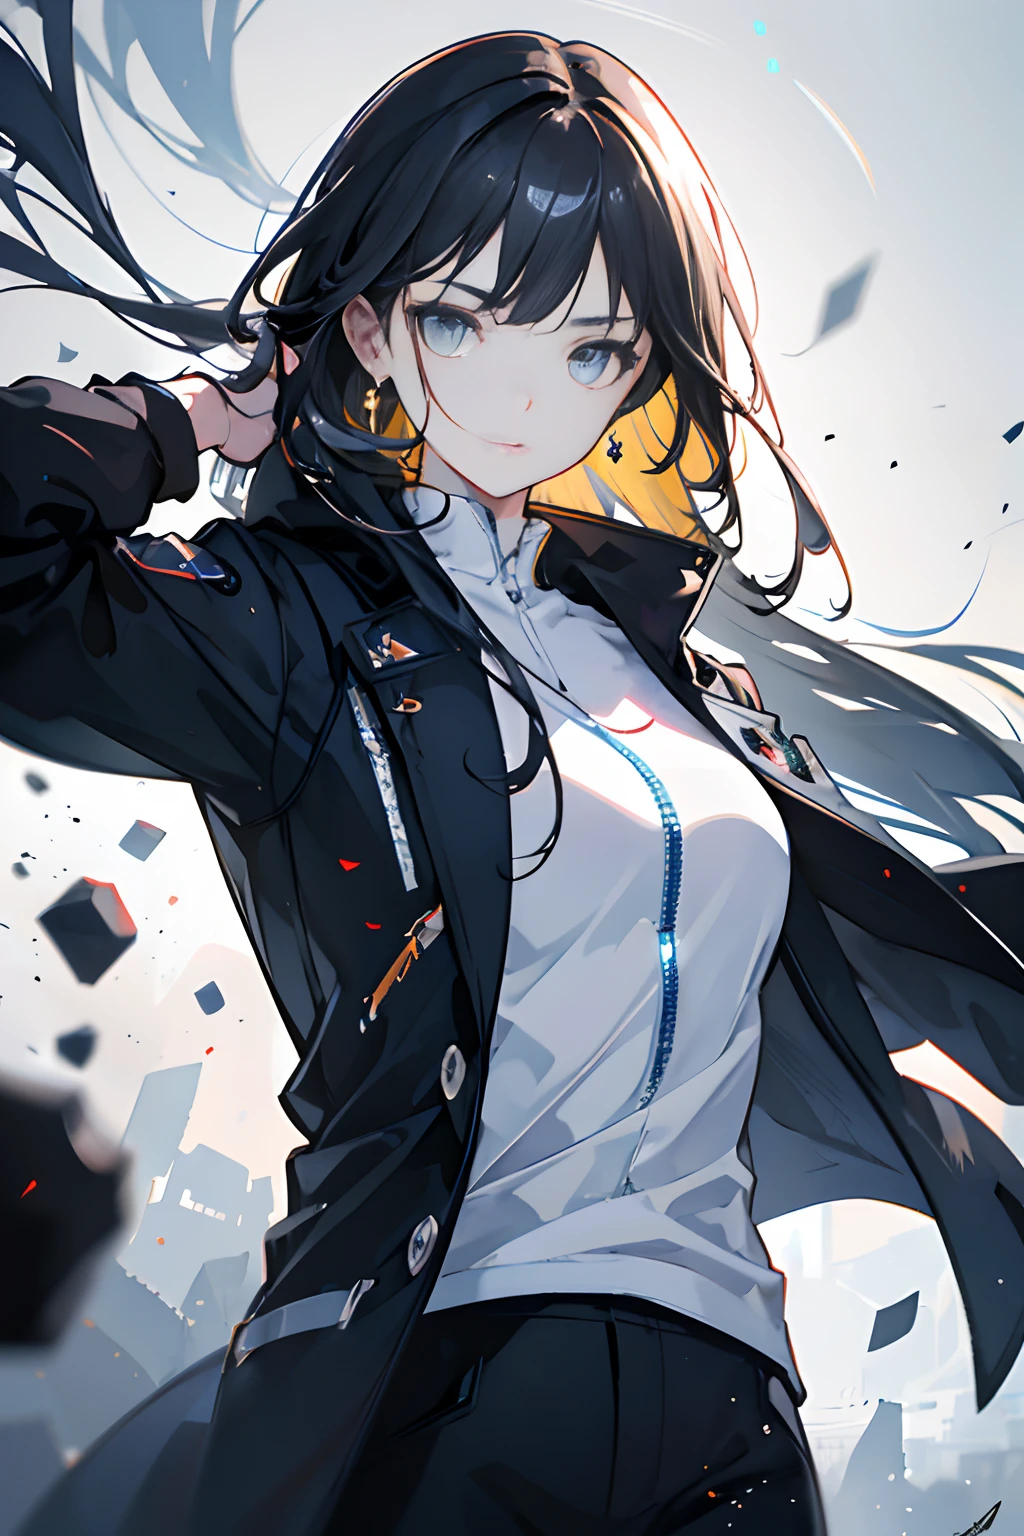 1boys，Black hair，Uniforms，white  shirt,，Wearing earrings，Black coat，hooligan，This character has muscles，tall，extremely handsome，I have a tattoo on my arm，1girll，Long gray hair，Girls are short，The girl is , nffsw(HighDynamicRange)、Ray traching、NVIDIA RTX、Hyper-Resolution、Unreal 5、Sub-surface scattering、PBR Texturing、Postprocess、Anisotropy Filtering、depth of fieldaximum clarity and sharpnesulti-layer texture、Albedo and specular maps、Surface Shading、Accurate simulation of light-material interactions、octan render、Two-tone lighting、Low ISO、 White Balance, thirds rule, Large aperture, 8K Raw, Efficient Subpixel, sub-pixel convolution, (Luminescent particles:1.4), {{​masterpiece, Top image quality, Ultra High Definition CG, Unity 8k Wallpapers, 。.。.3D, cinematlic lighting, lensflare}},{{​masterpiece、top-quality、extremely details CG、16 K、Cinematographic lighting、lensflare}}、